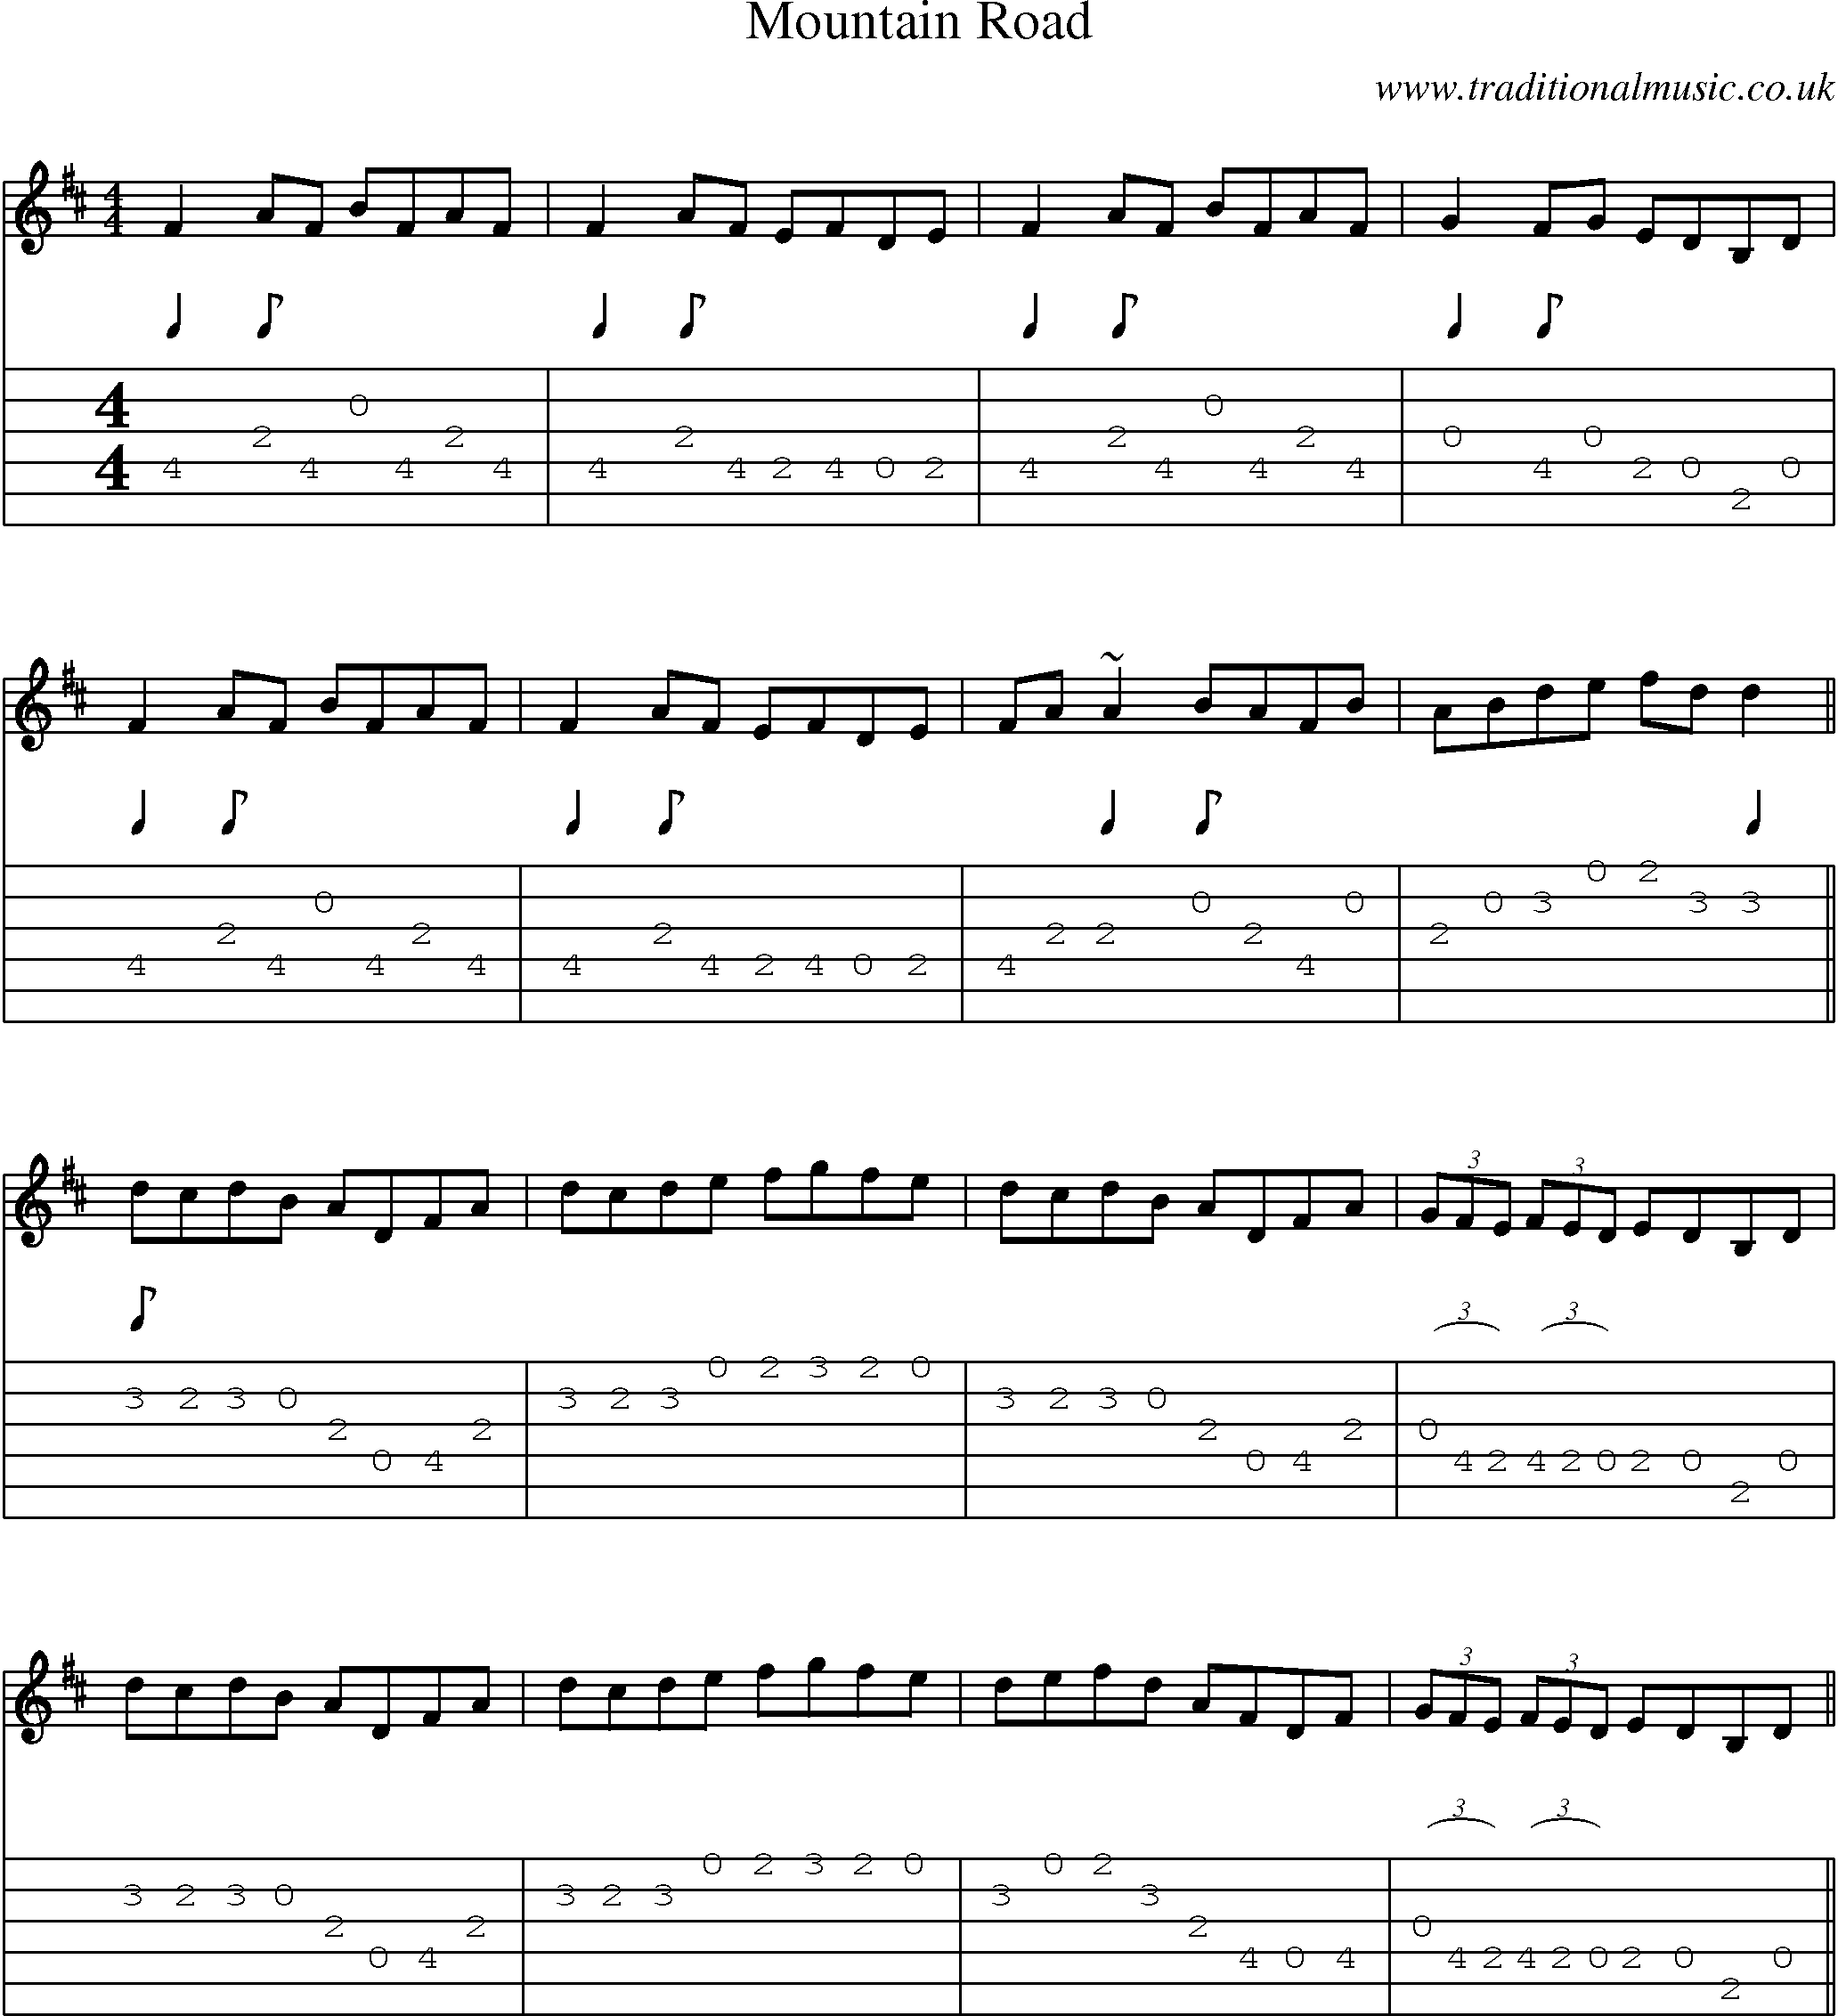 Music Score and Guitar Tabs for Mountain Road